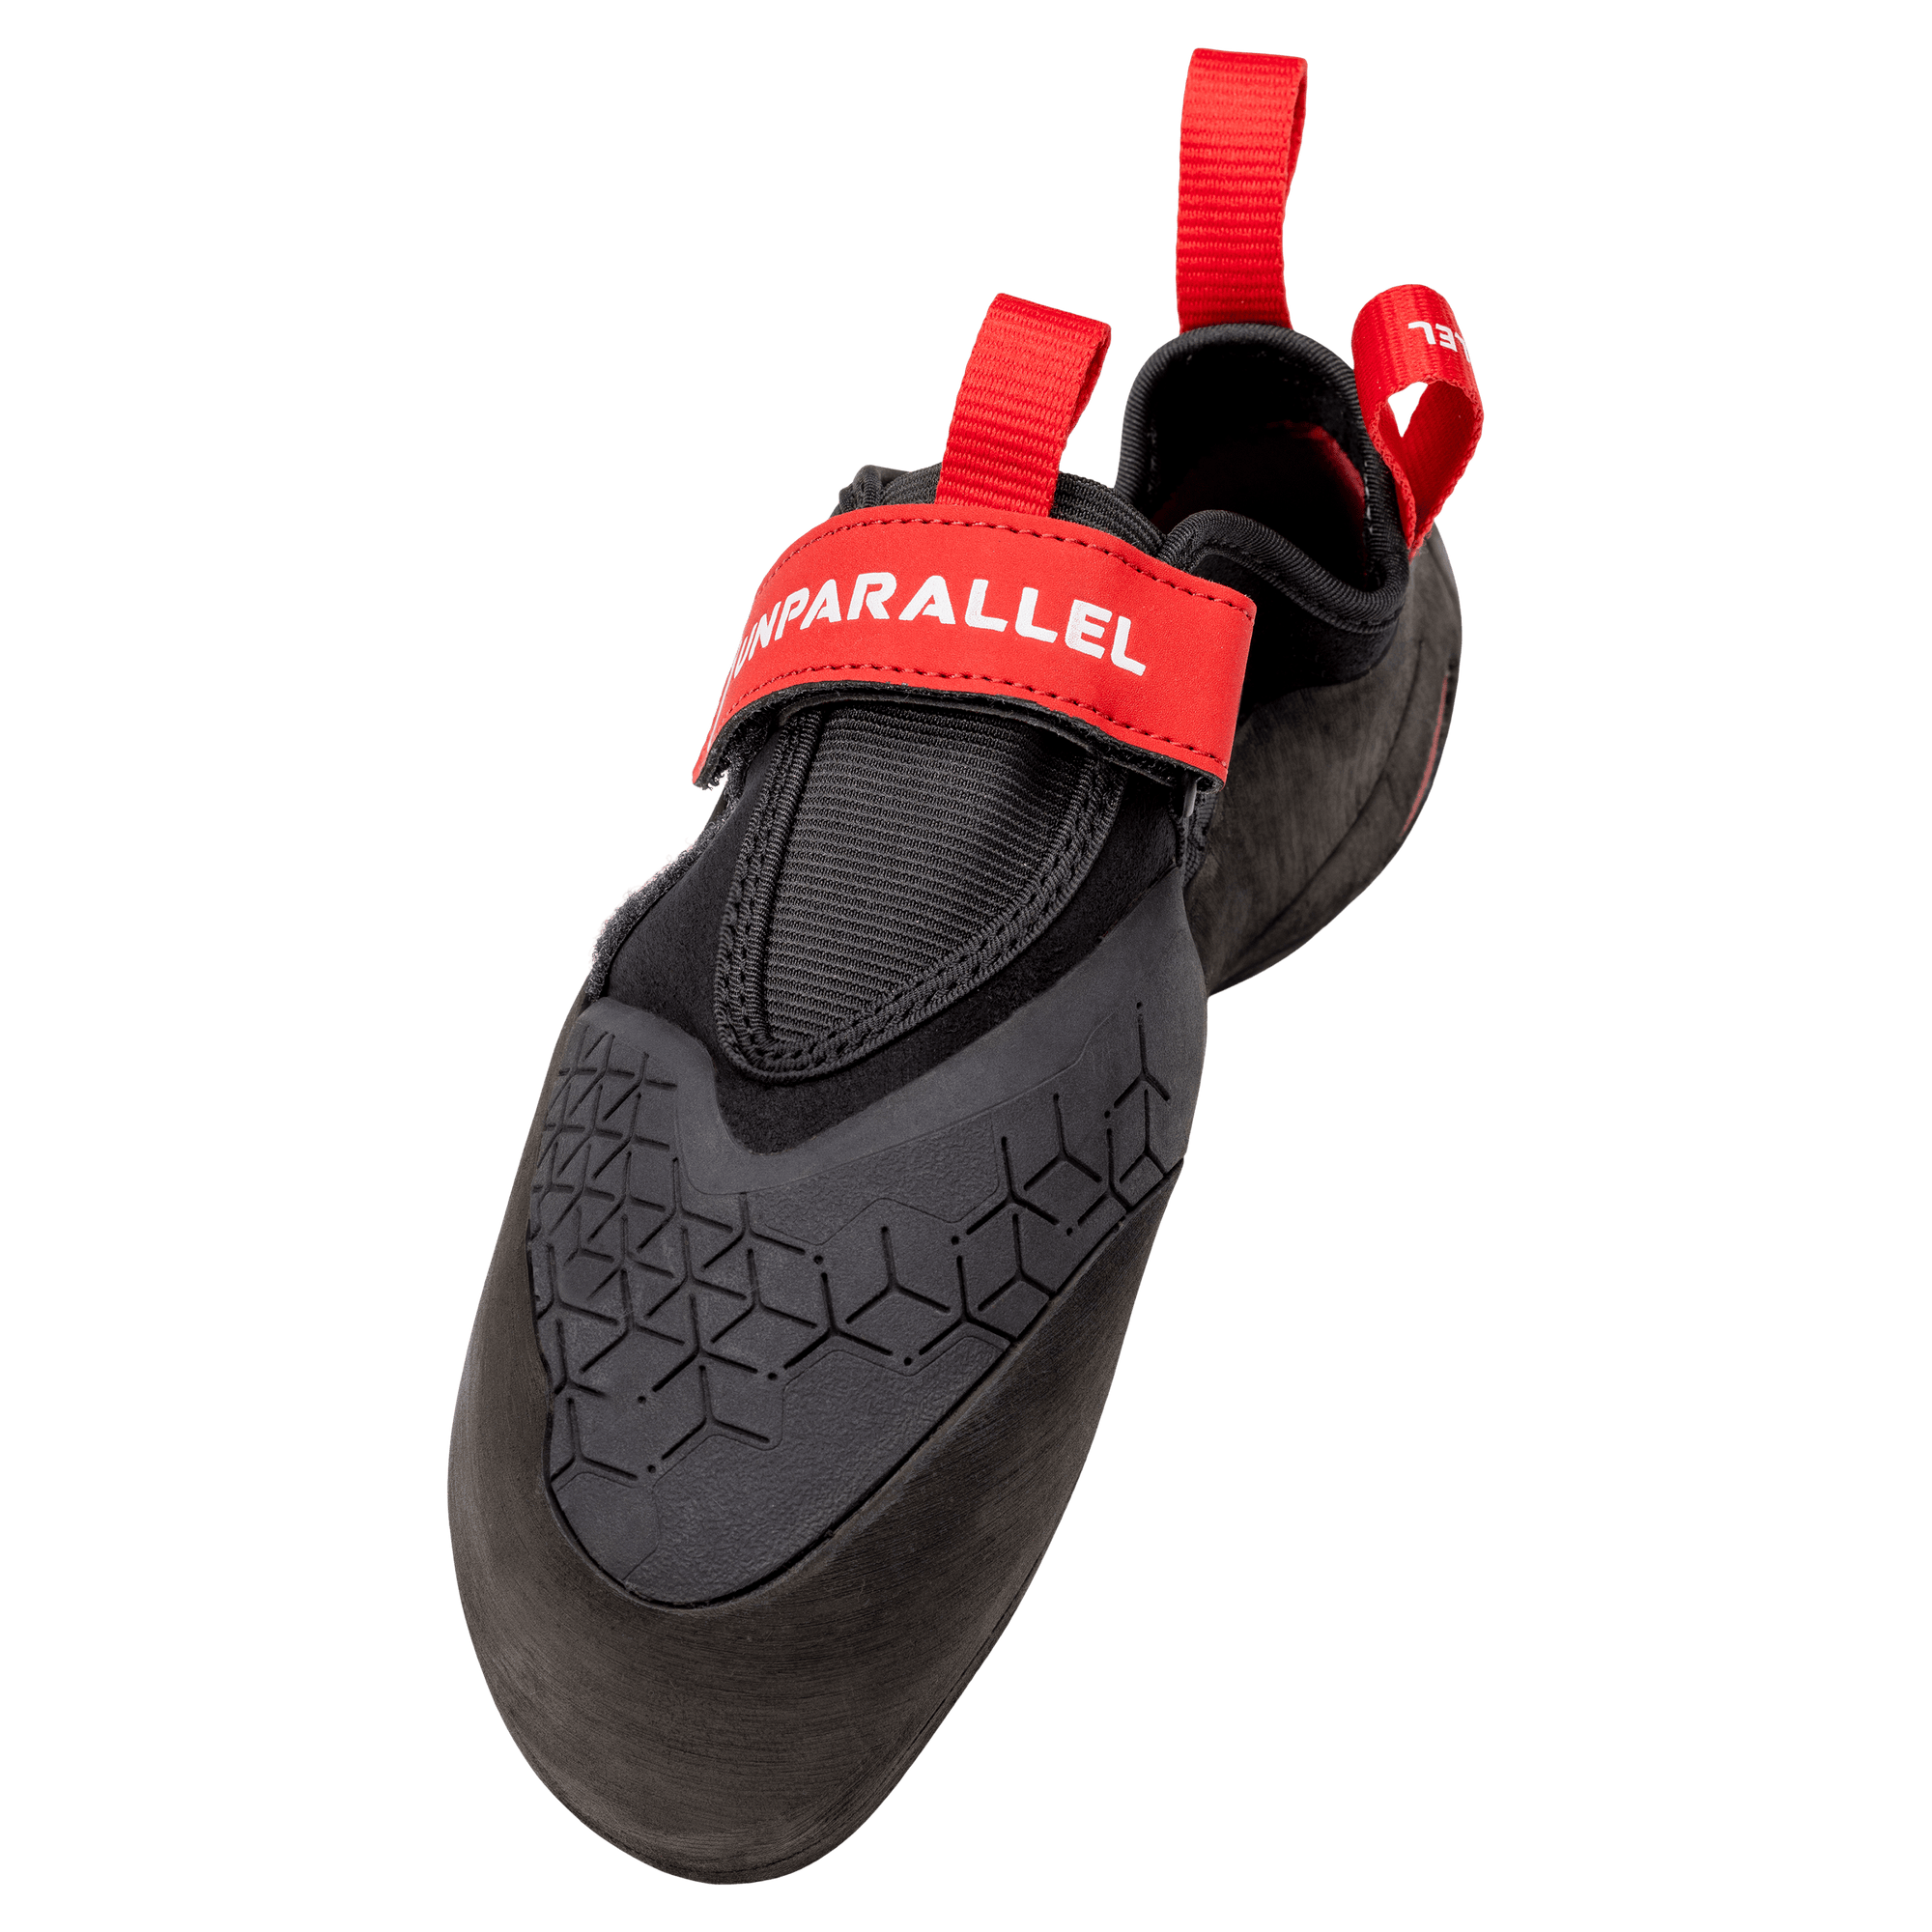 Unparallel Flagship Pro climbing shoes in red and black